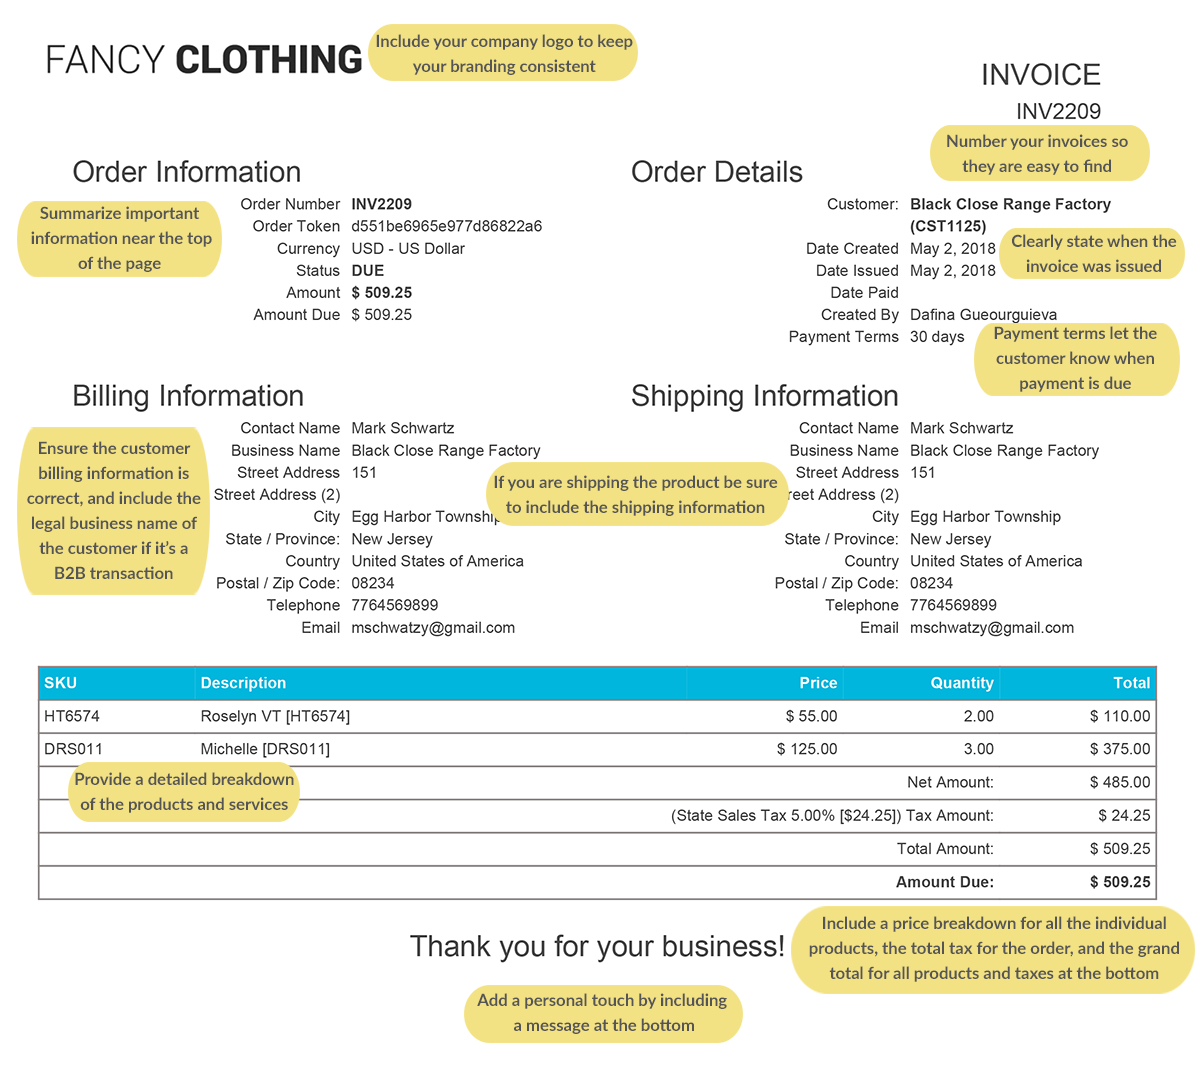 an invoice template for fancy clothing